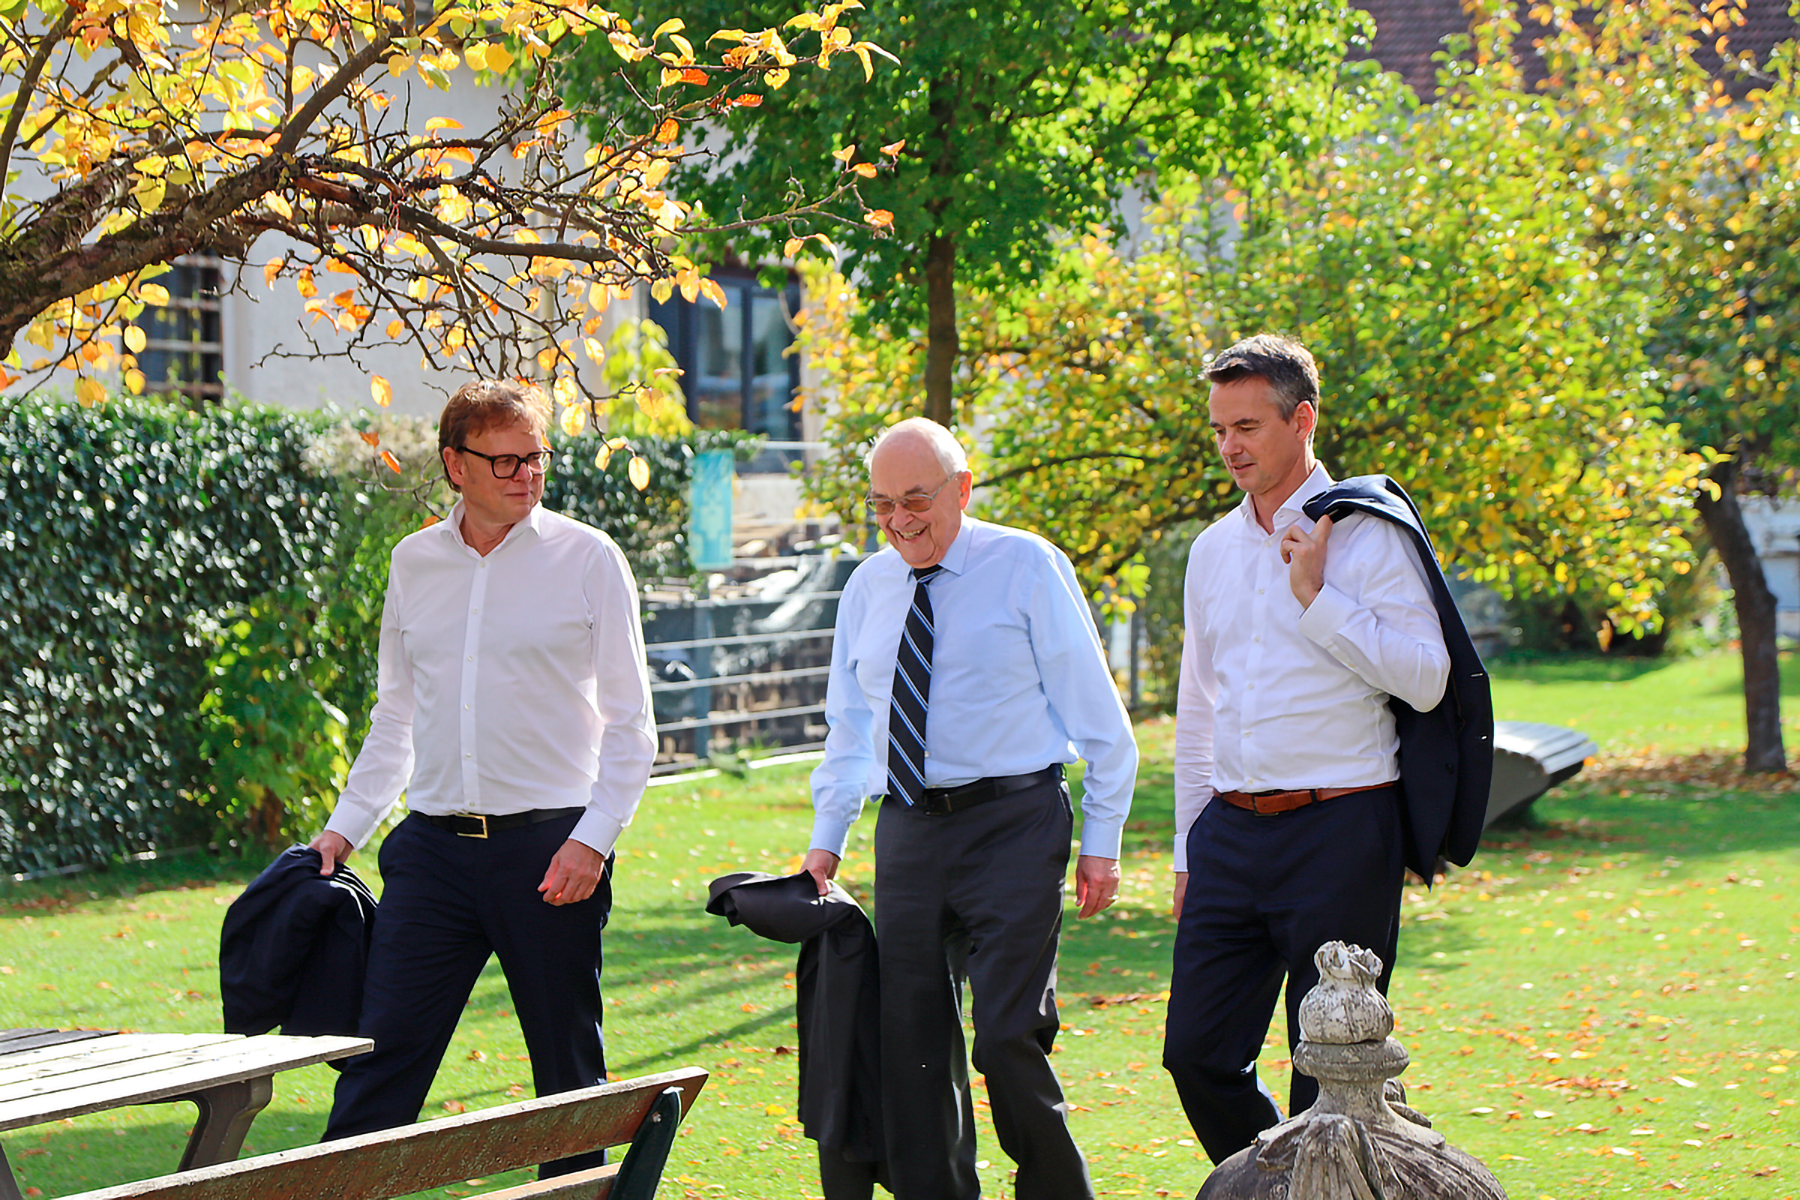 The image shows Michael, Florian and Horst Schmidmer during a walk through the park of Noris Group GmbH